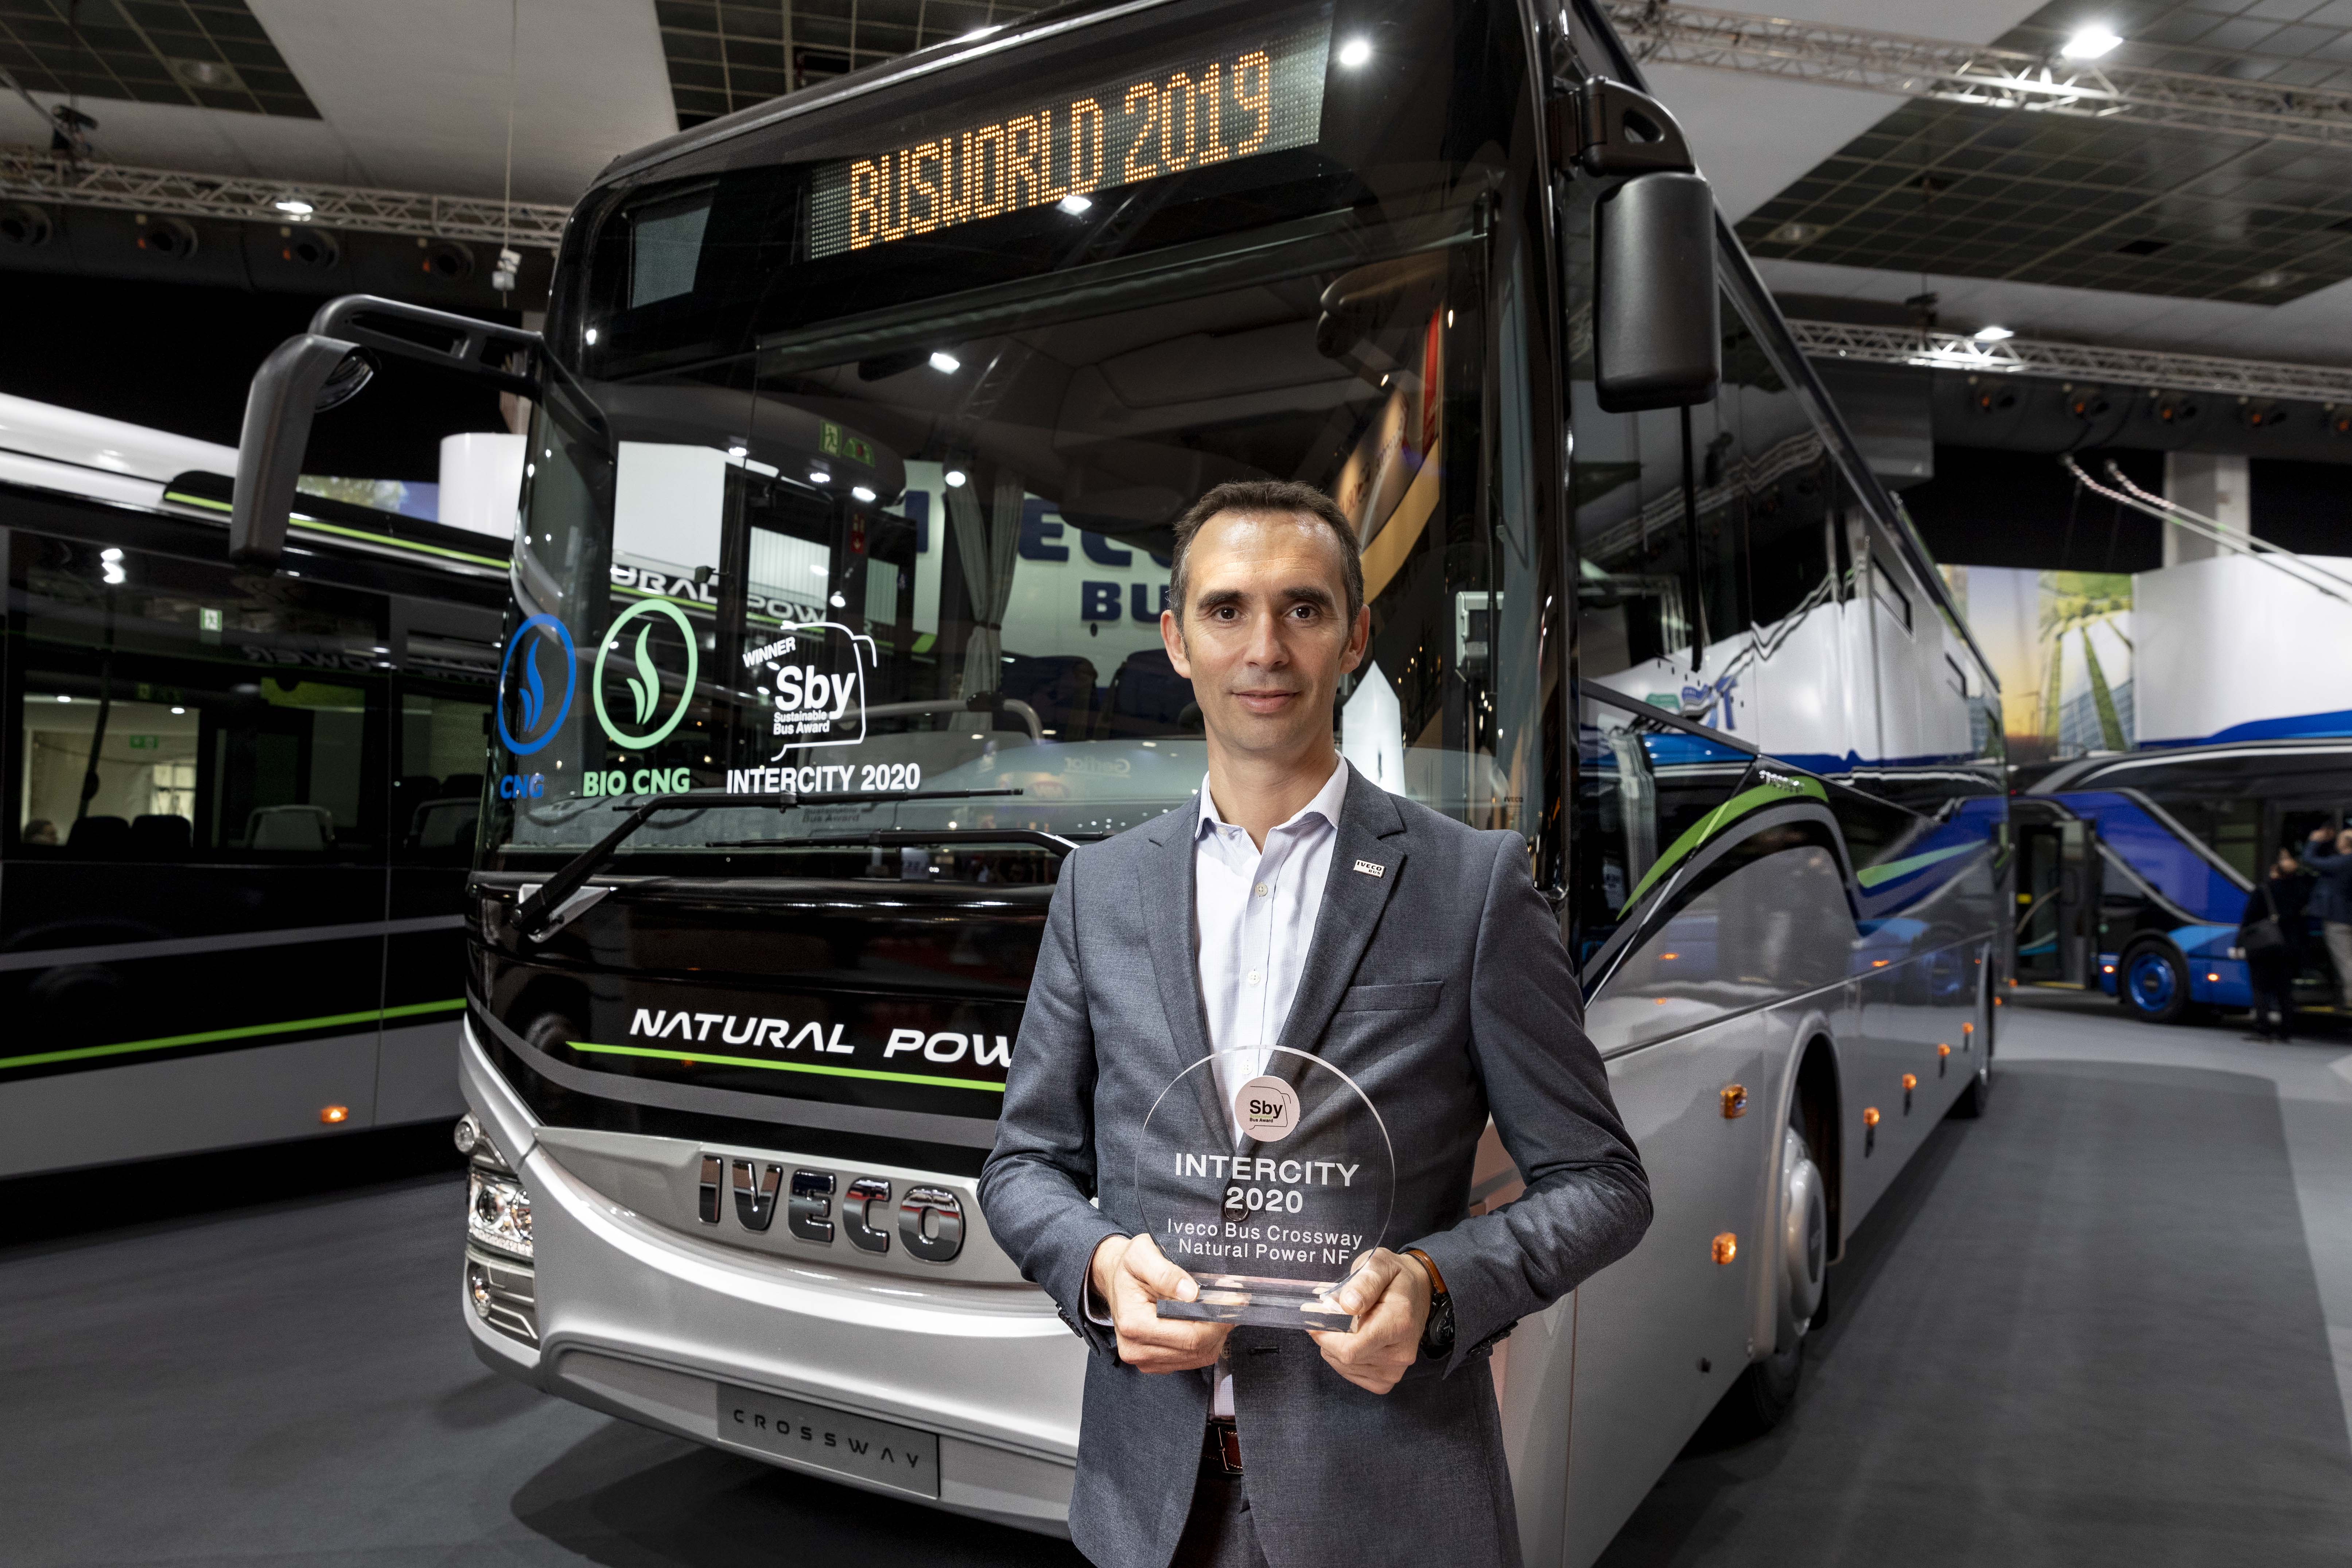 Sustainable Bus of the Year 2019